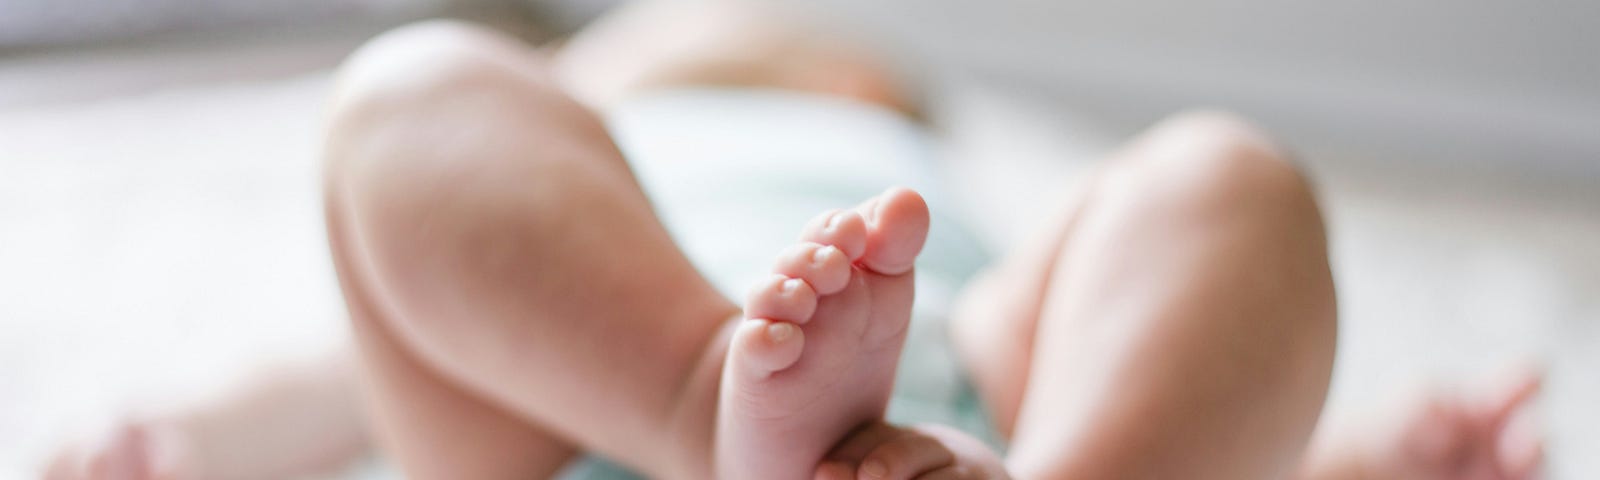 Curled up legs and feet of newborn baby